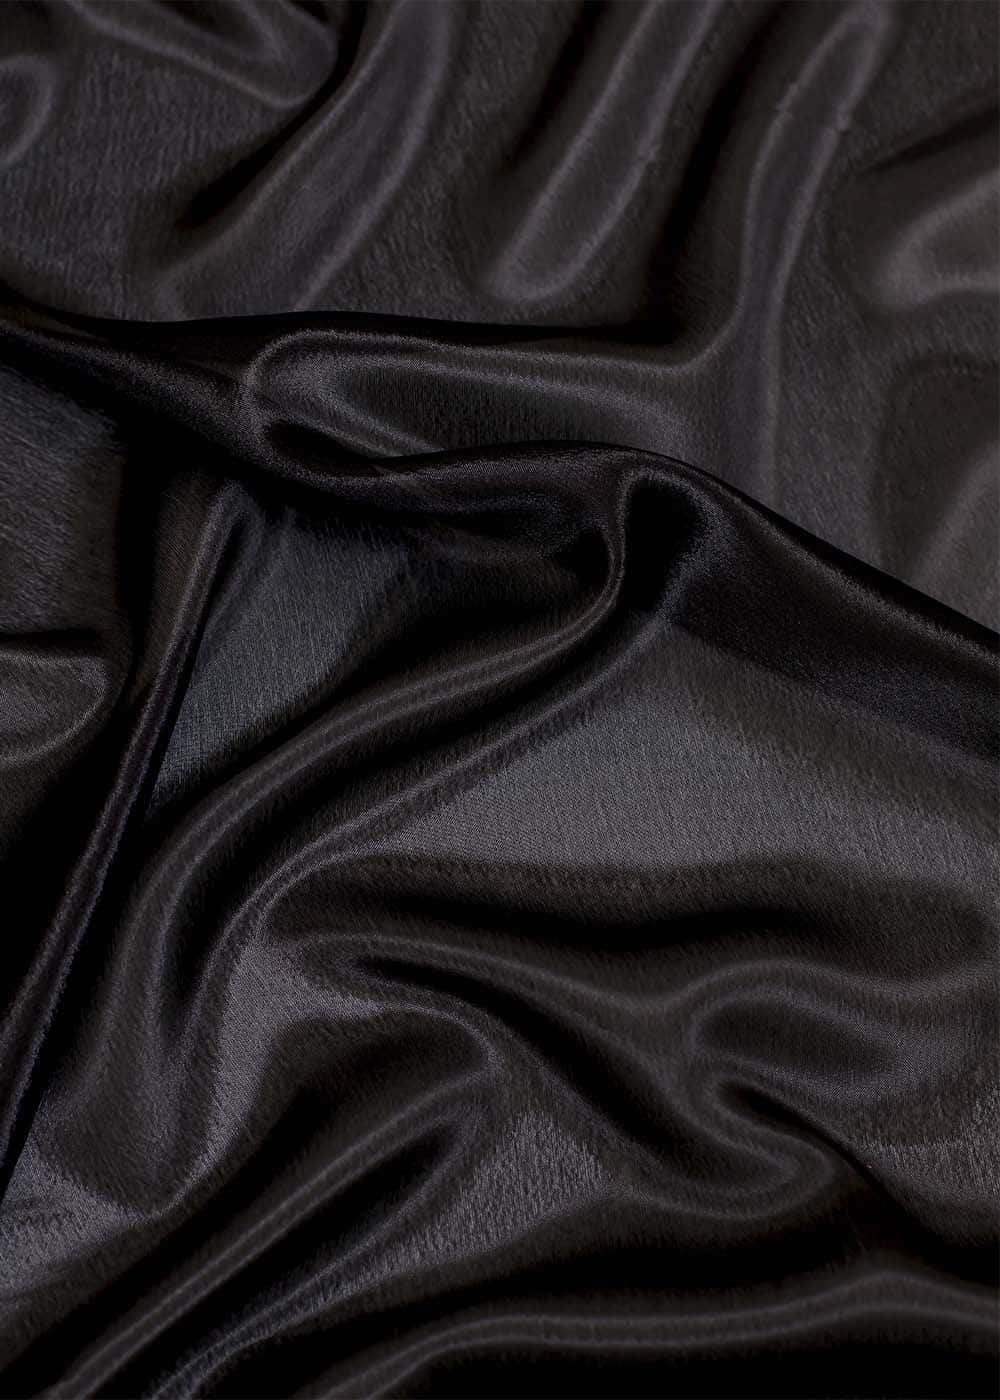 Satin chiffon CHRISANNE CLOVER to buy at the Grand Prix store